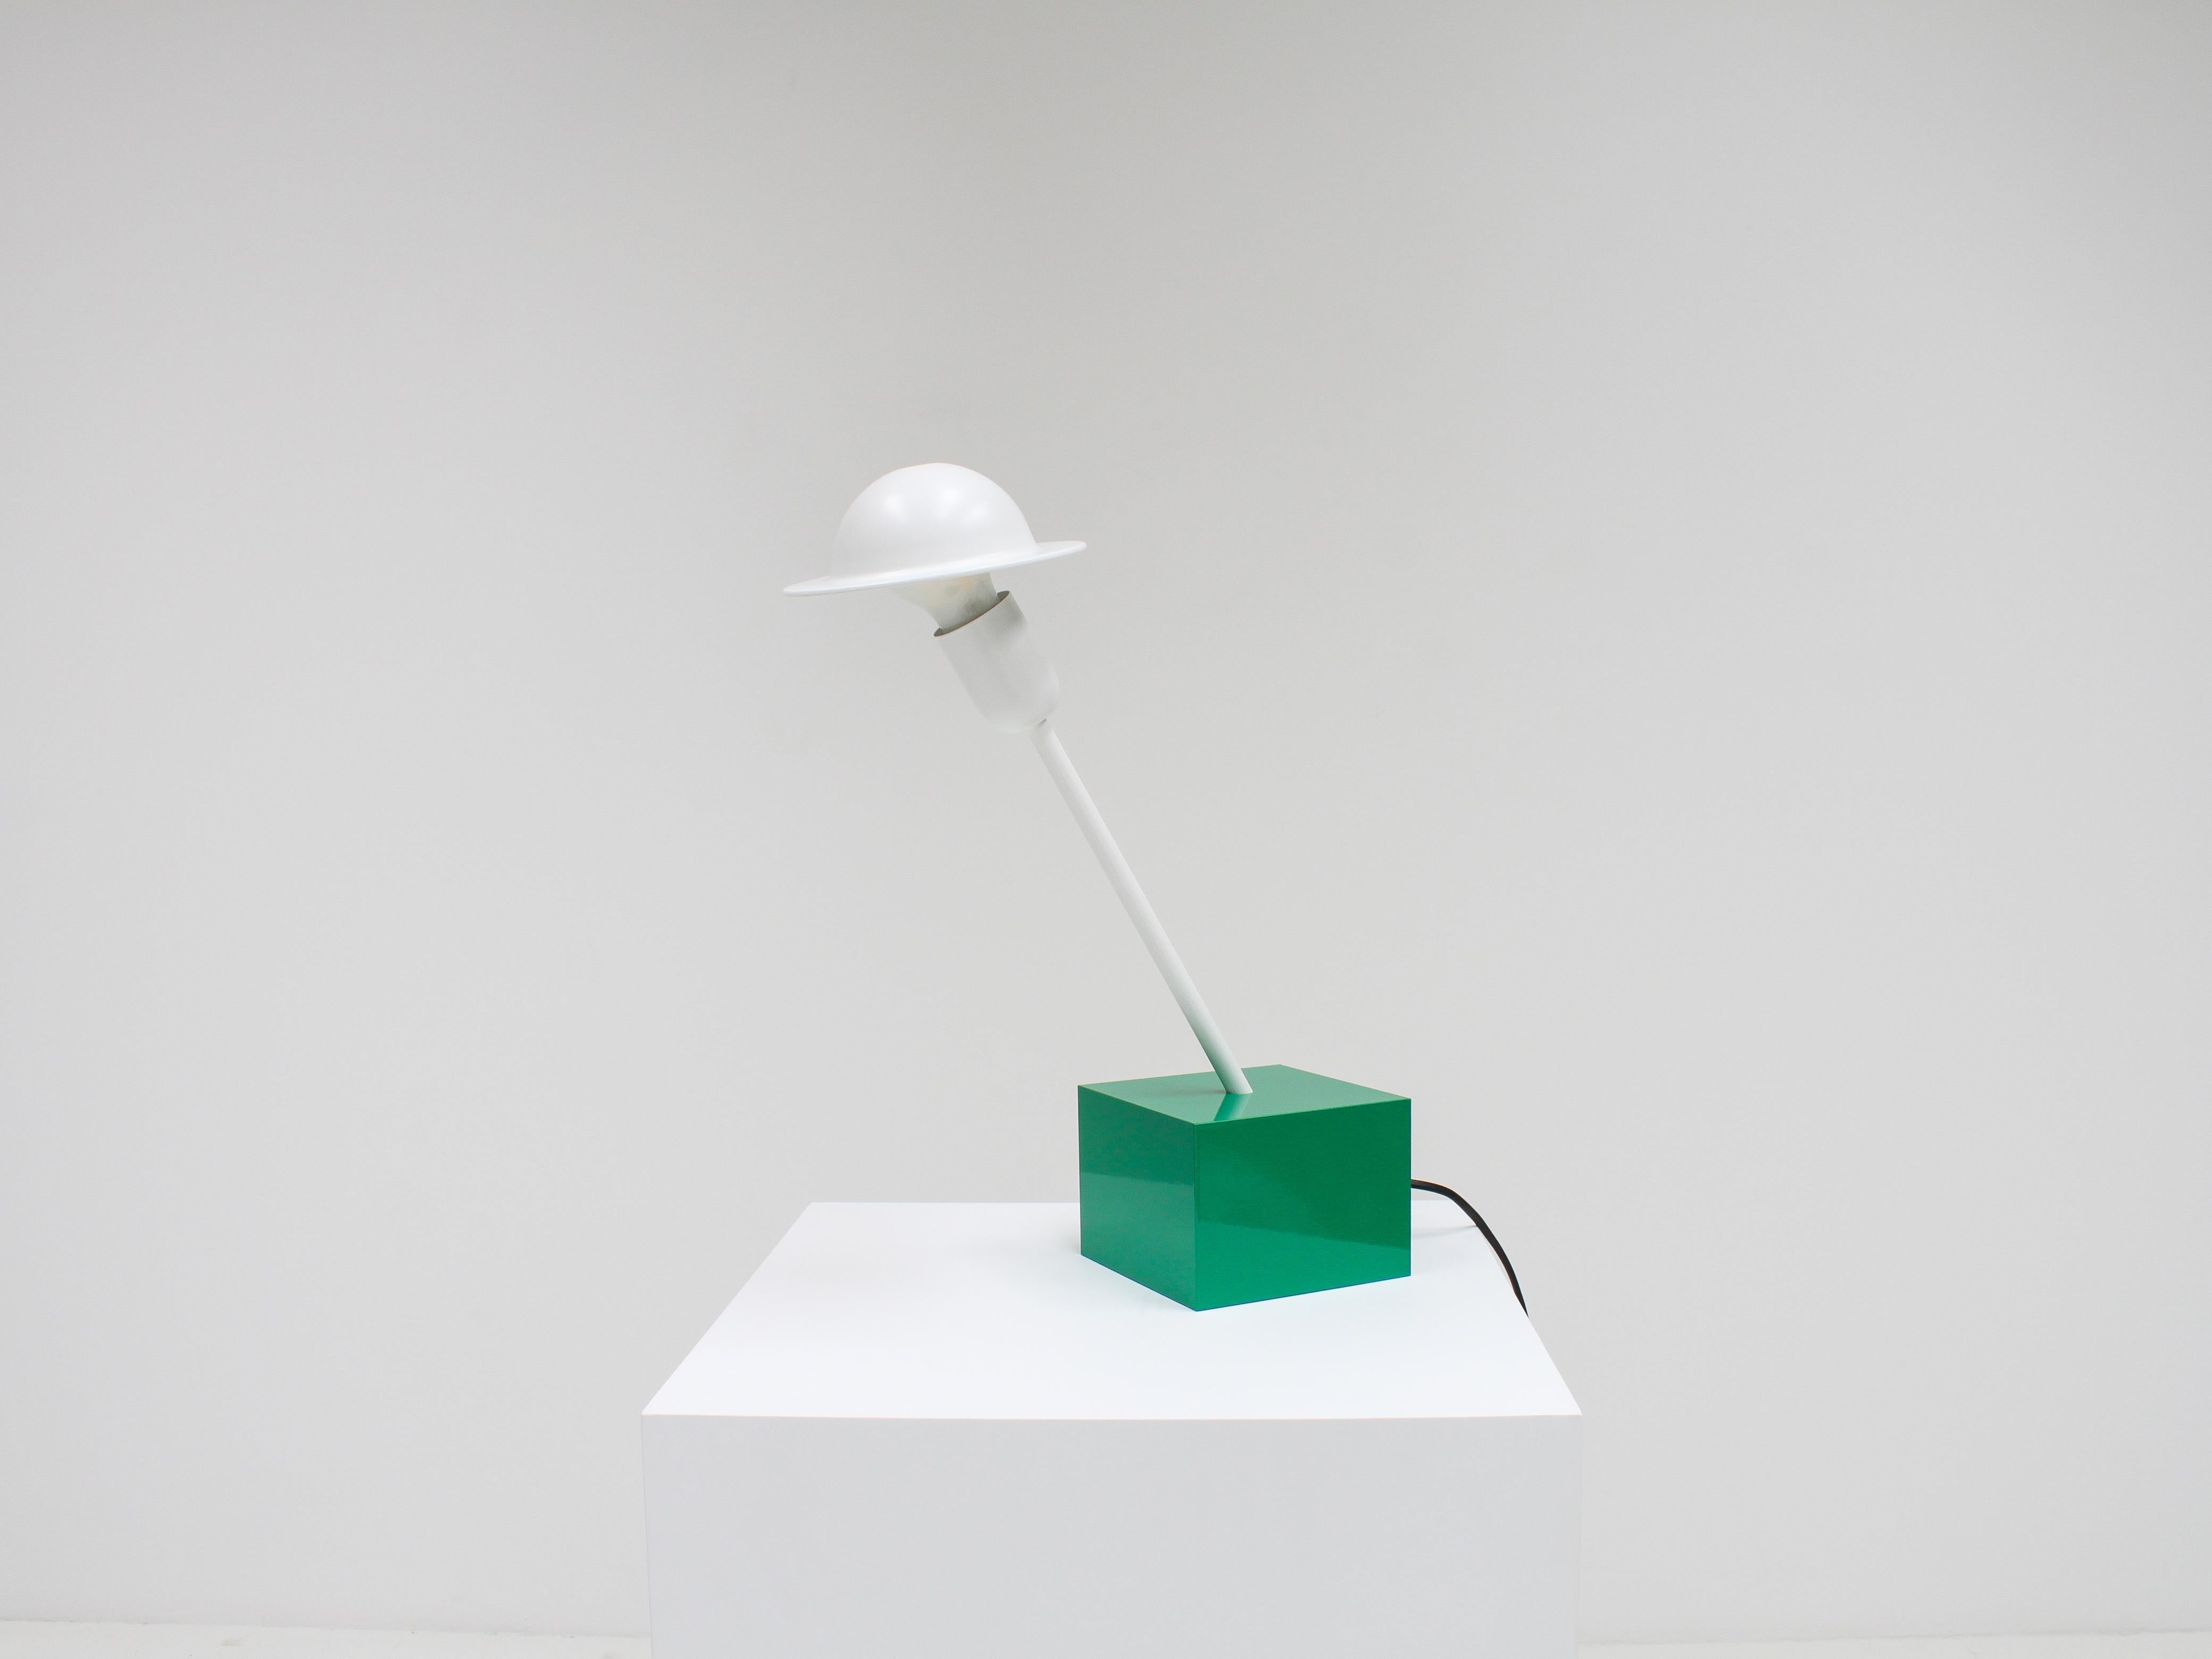 20th Century Don Table Lamp by Ettore Sottsass, Designed in 1977, Stilnovo, Italy